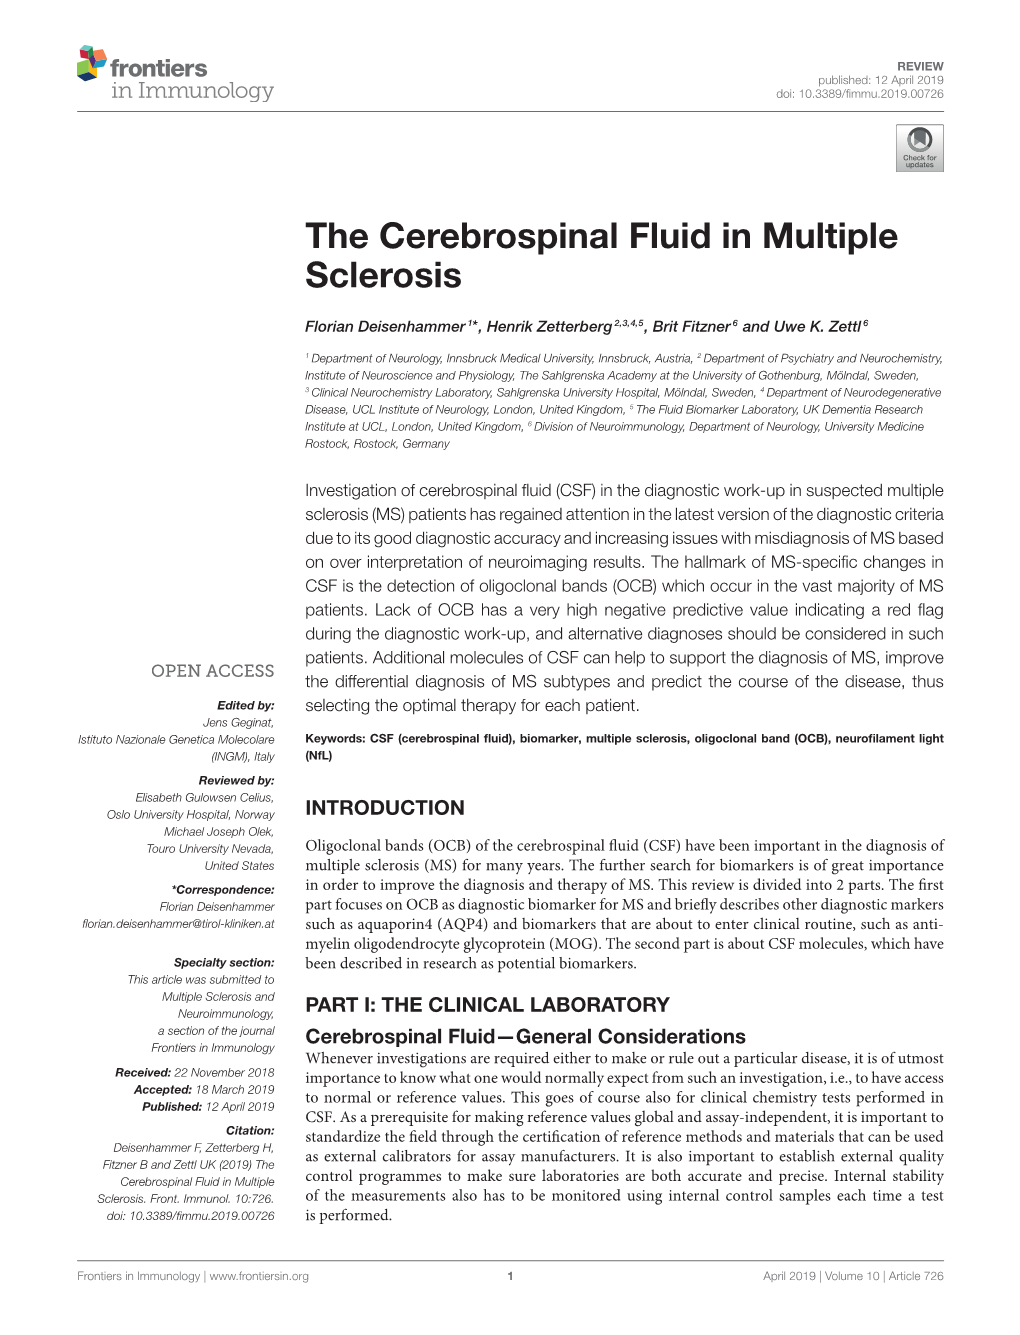 The Cerebrospinal Fluid in Multiple Sclerosis